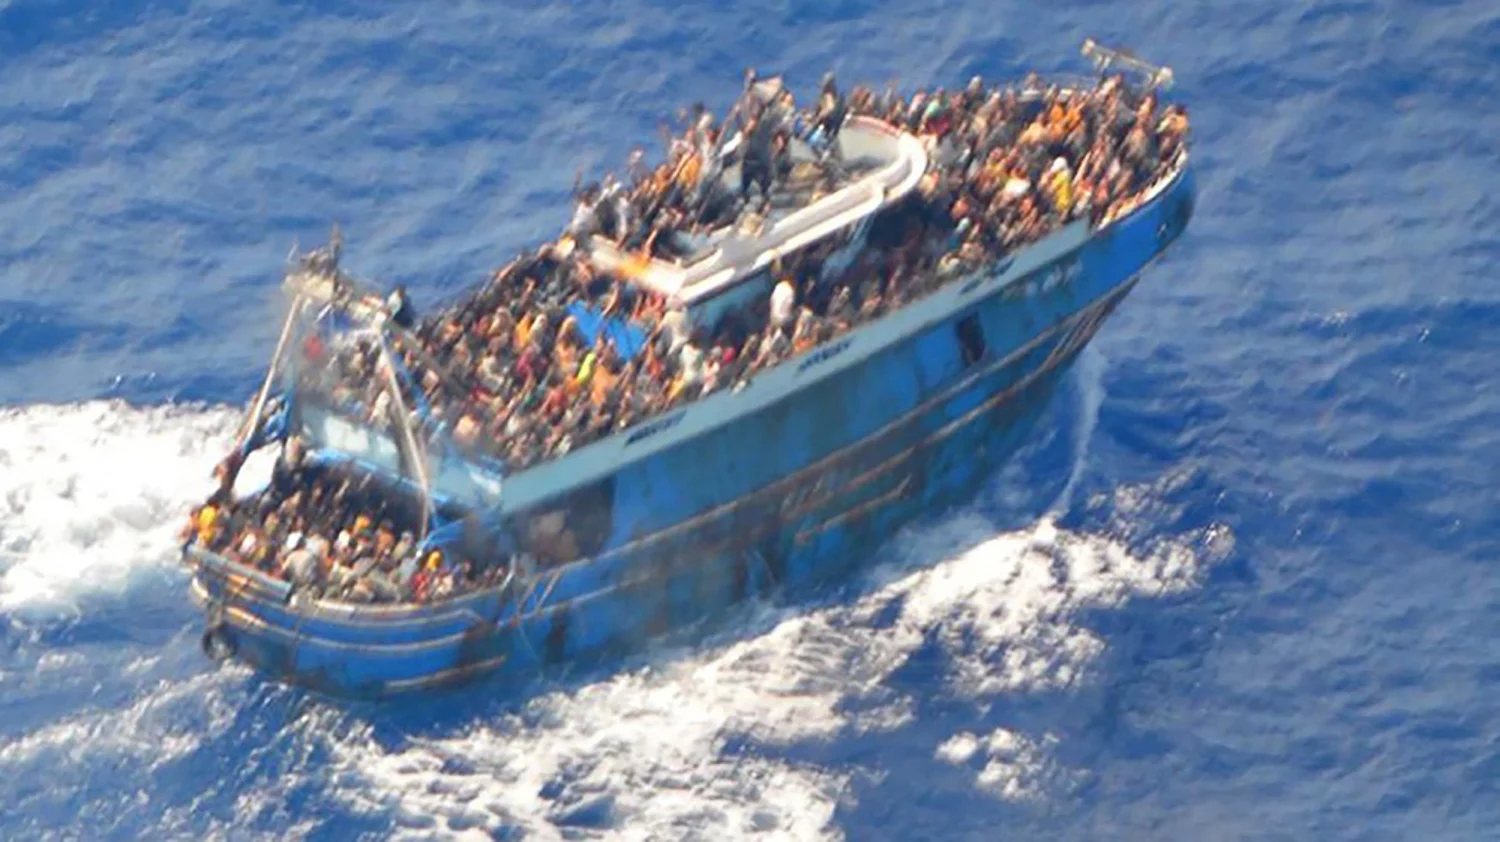 Migrants onboard a fishing vessel in the waters off the Peloponnese coast of Greece on Wednesday.